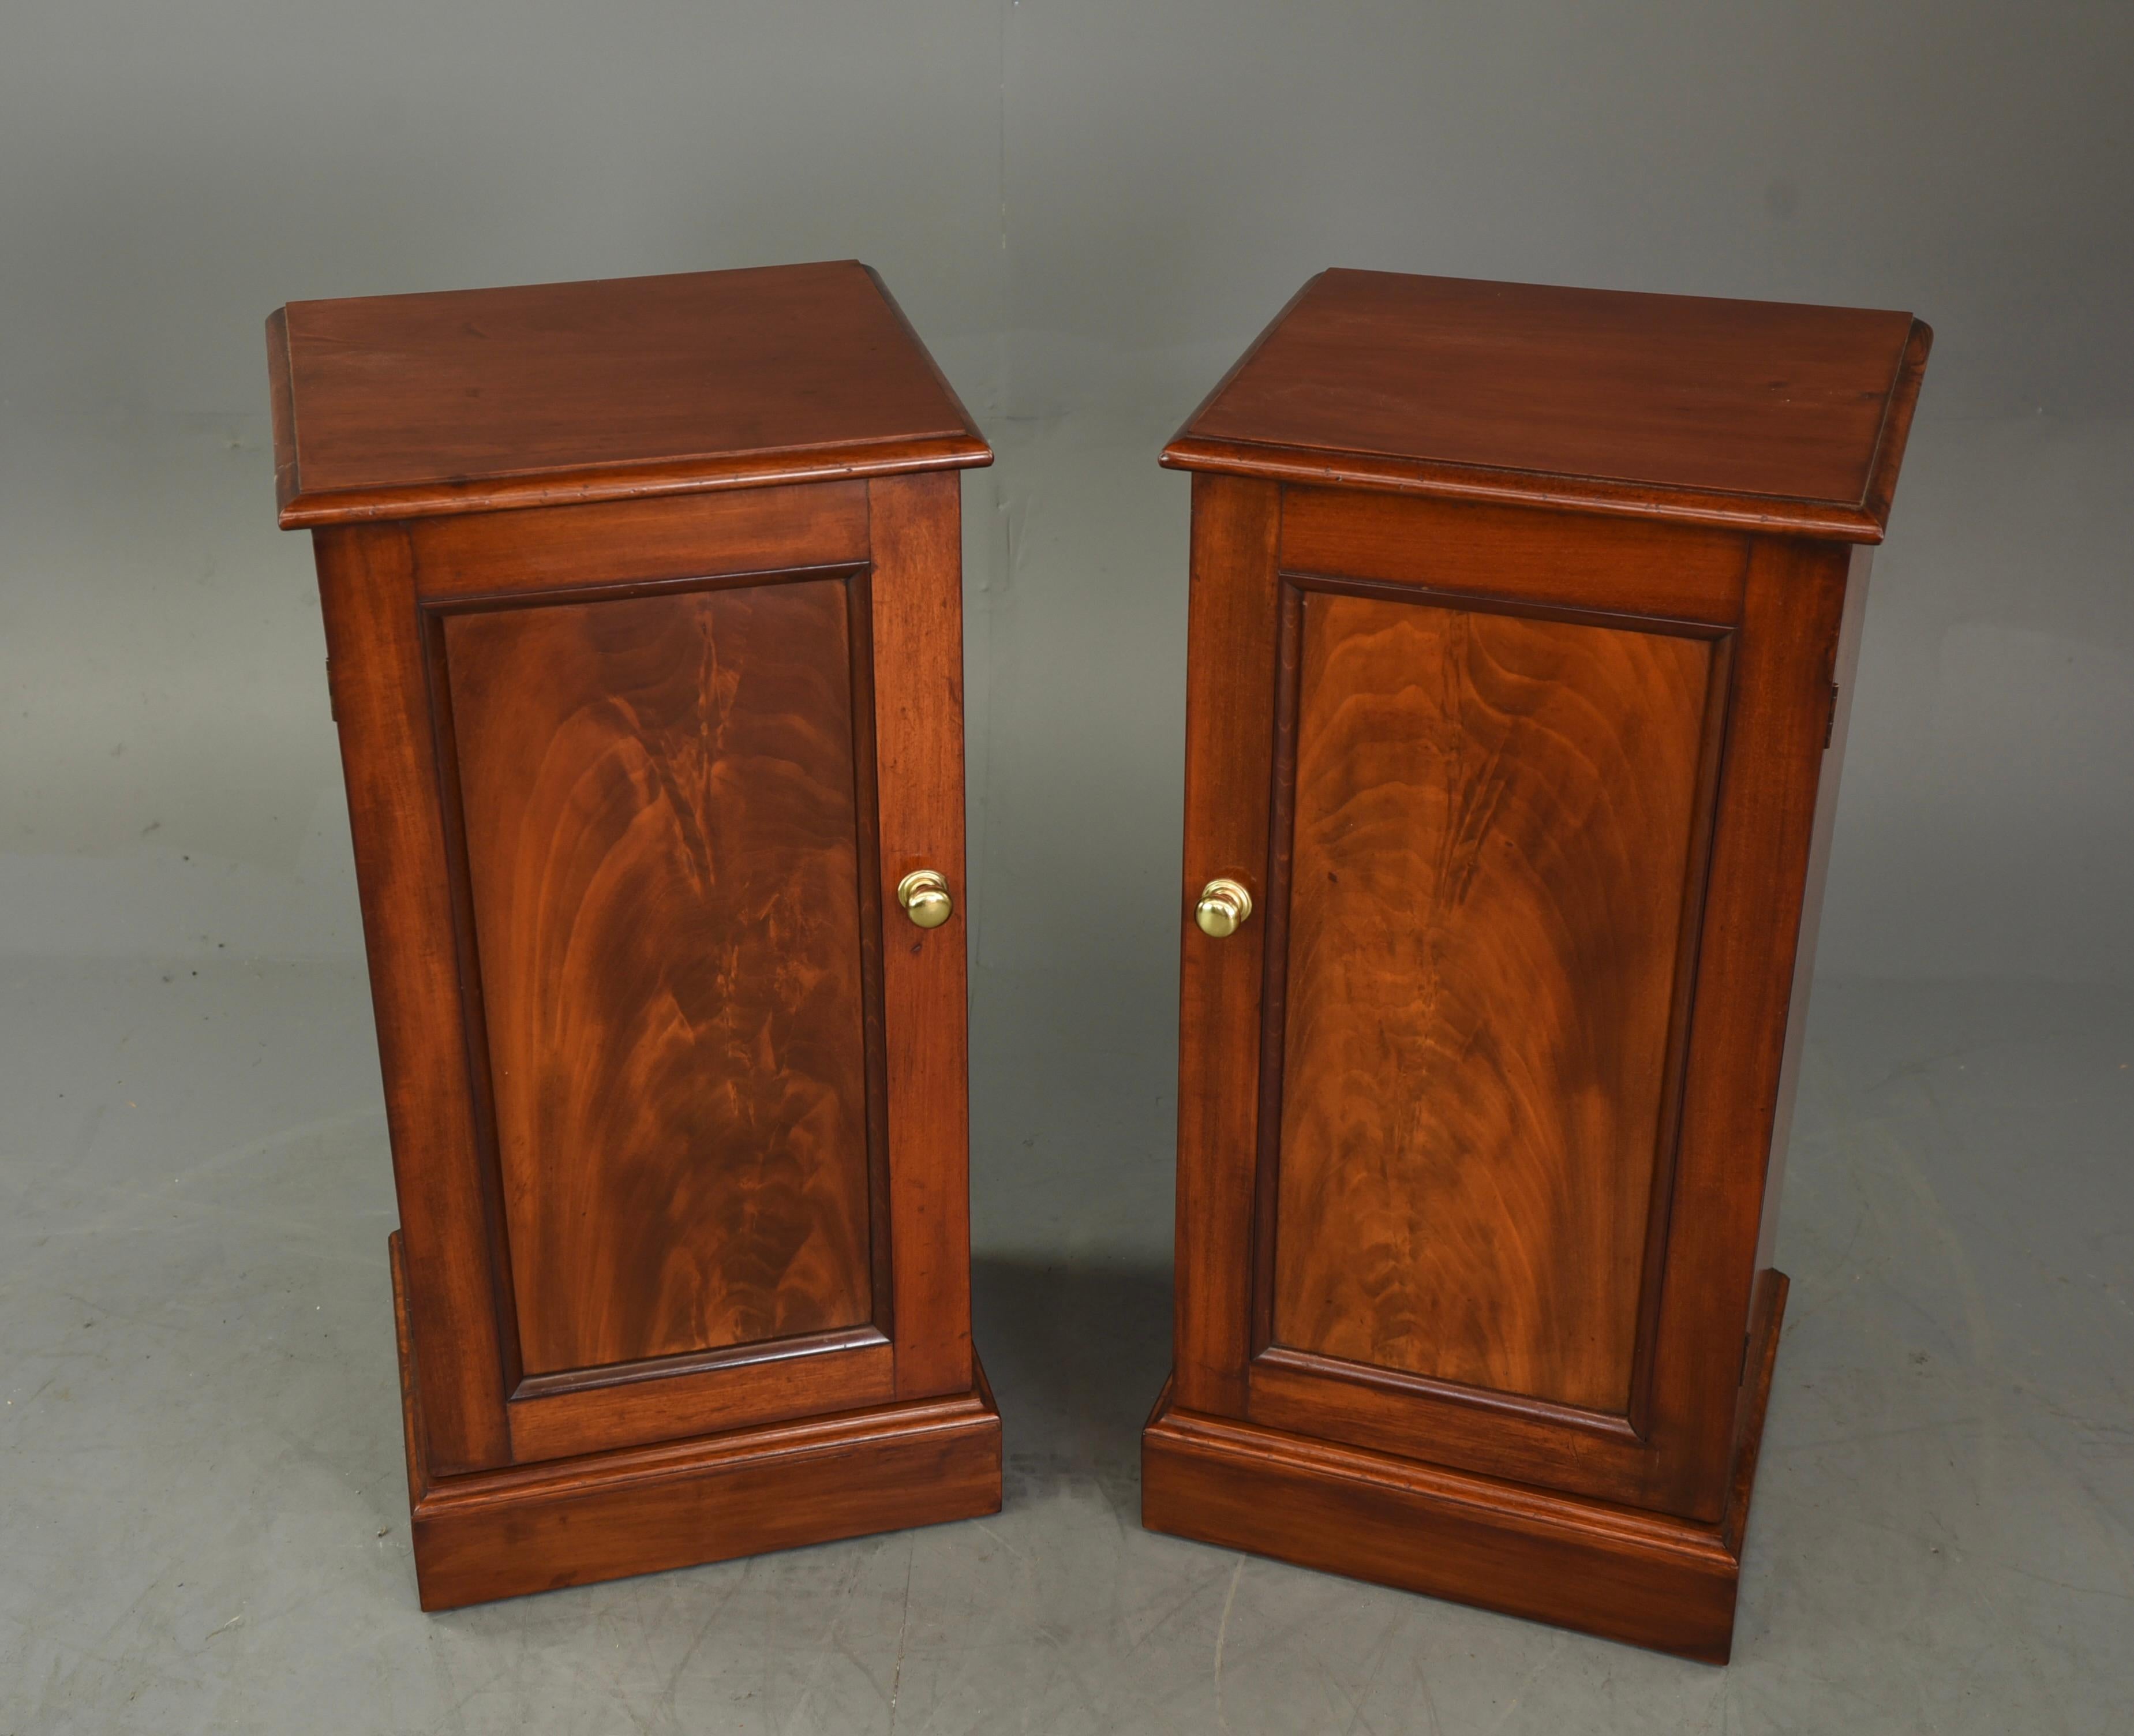 fine quality pair of Victorian mahogany bedside cabinets 
fully restored and cleaned inside and out nice proportions with wonderful flame mahogany doors . 